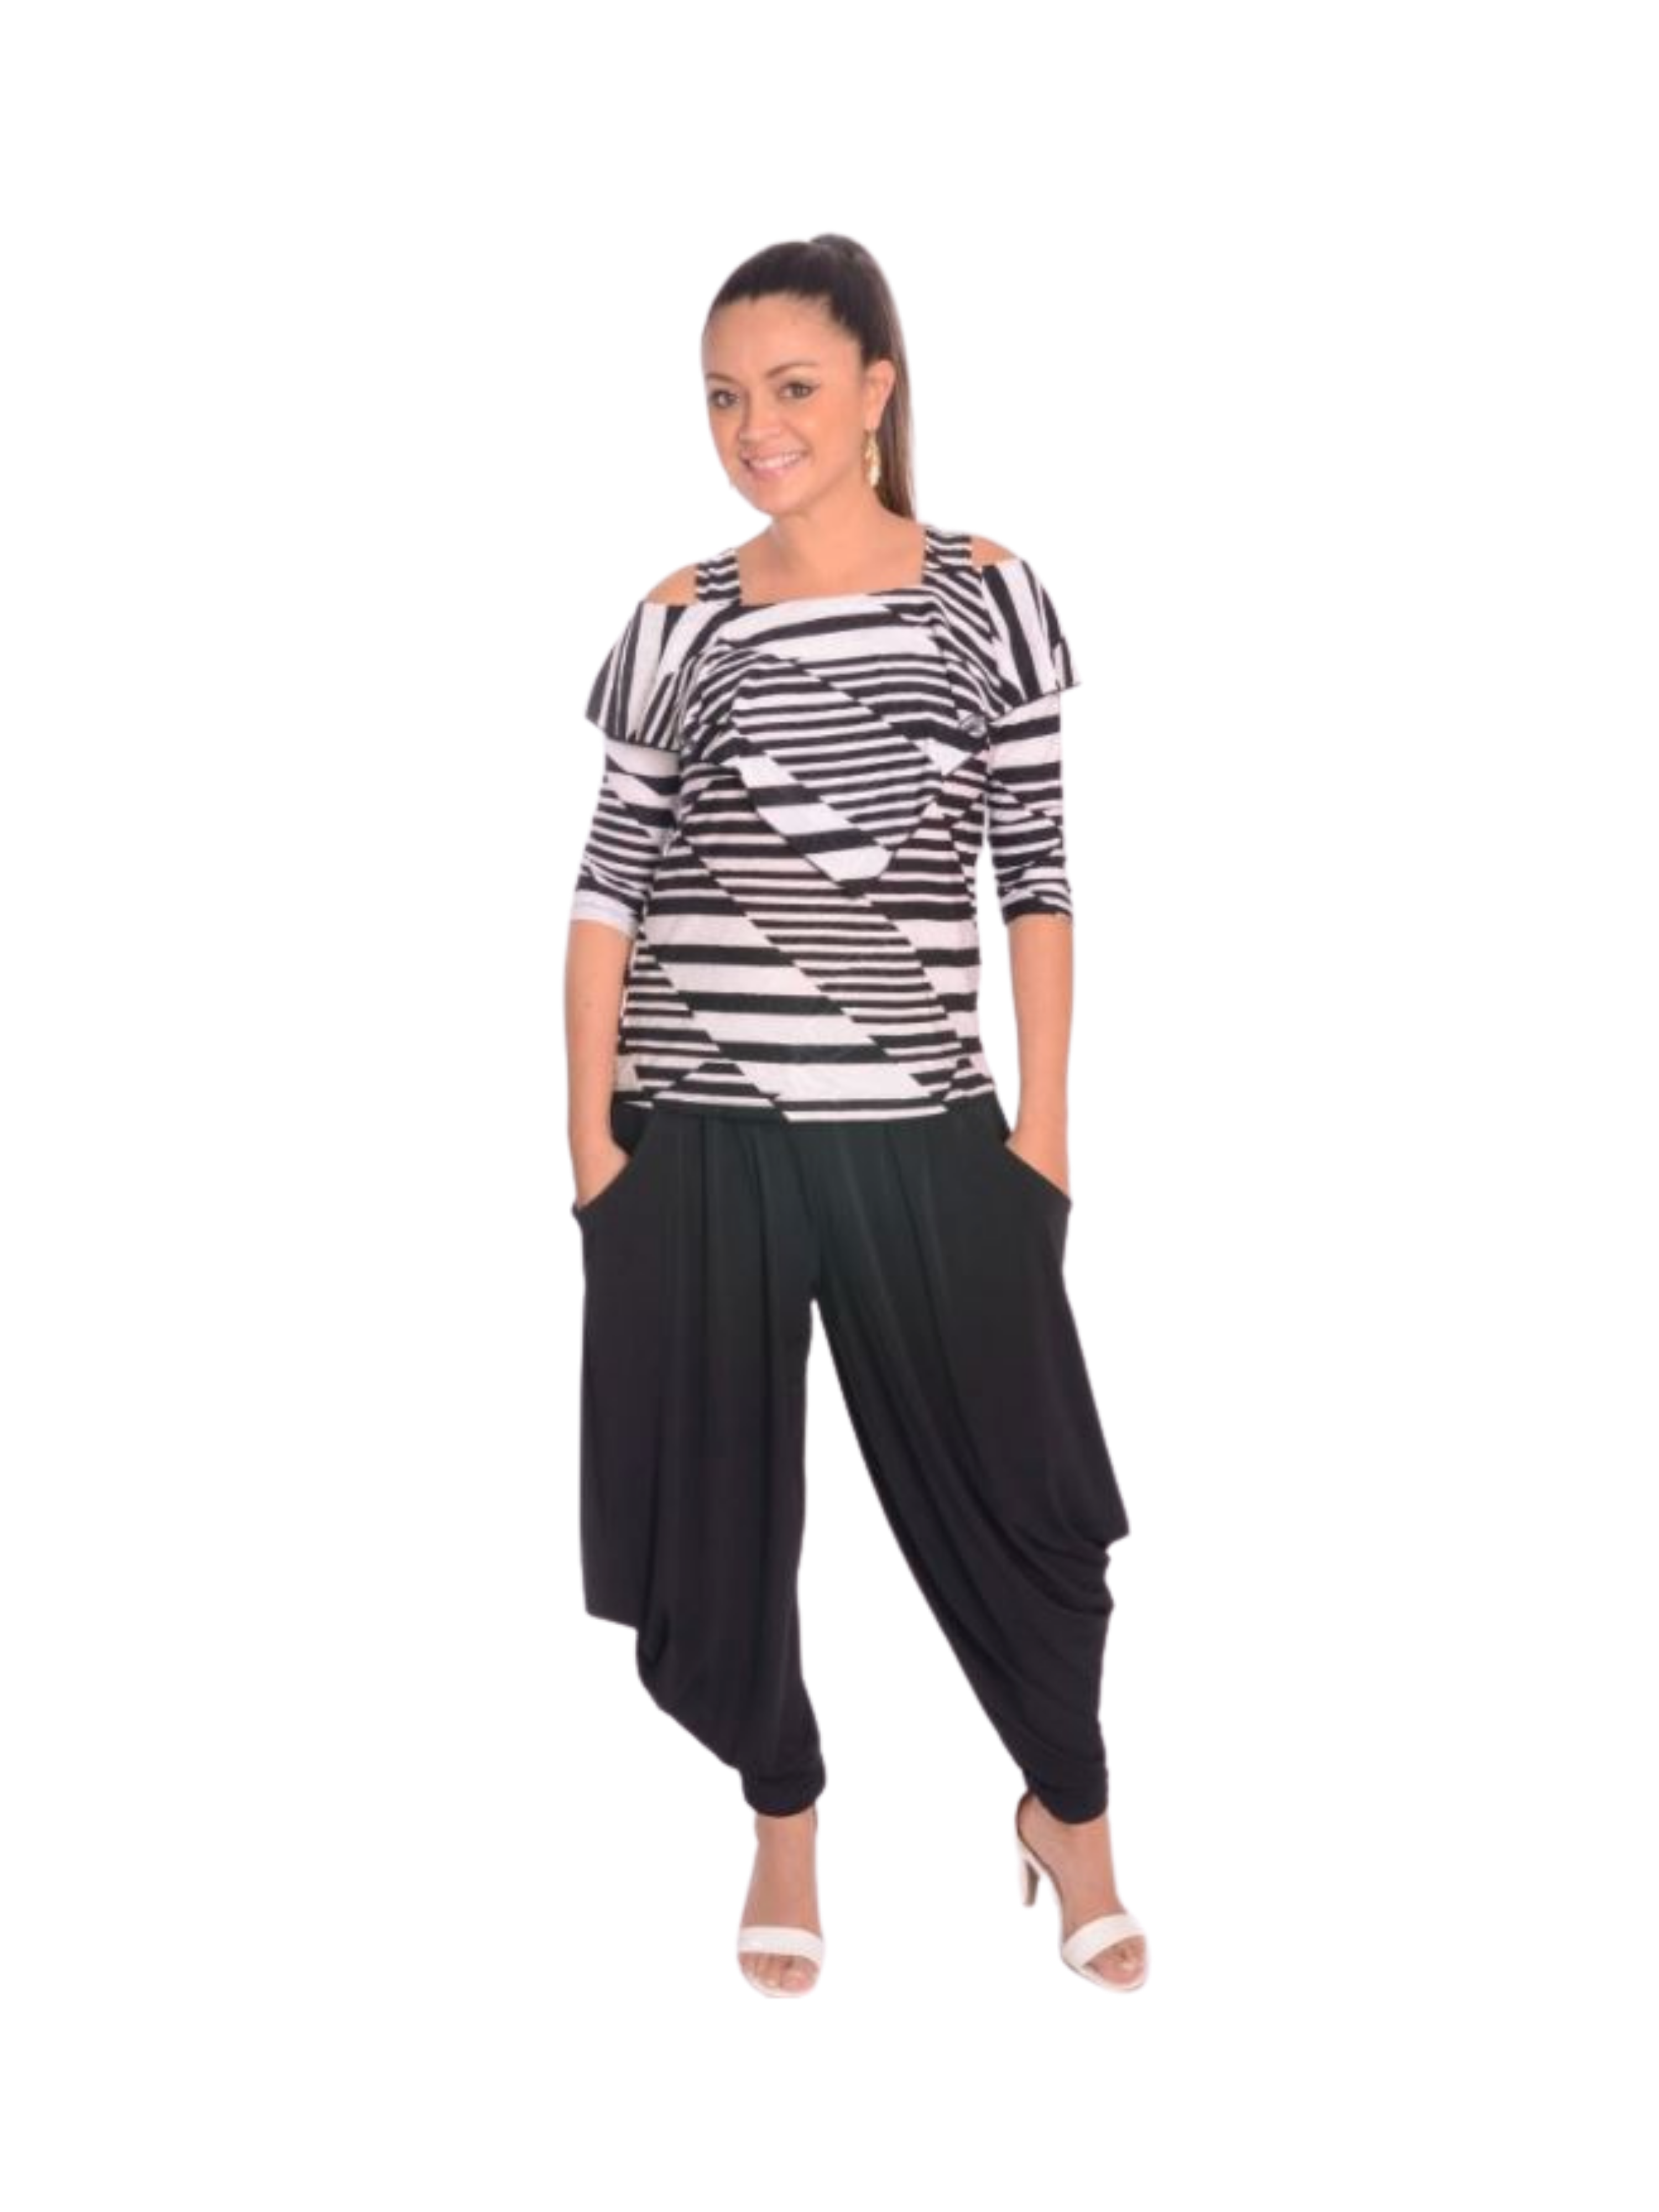 FASHQUE - Pull On pants with wide waist band and Kangaroo Pockets - P033